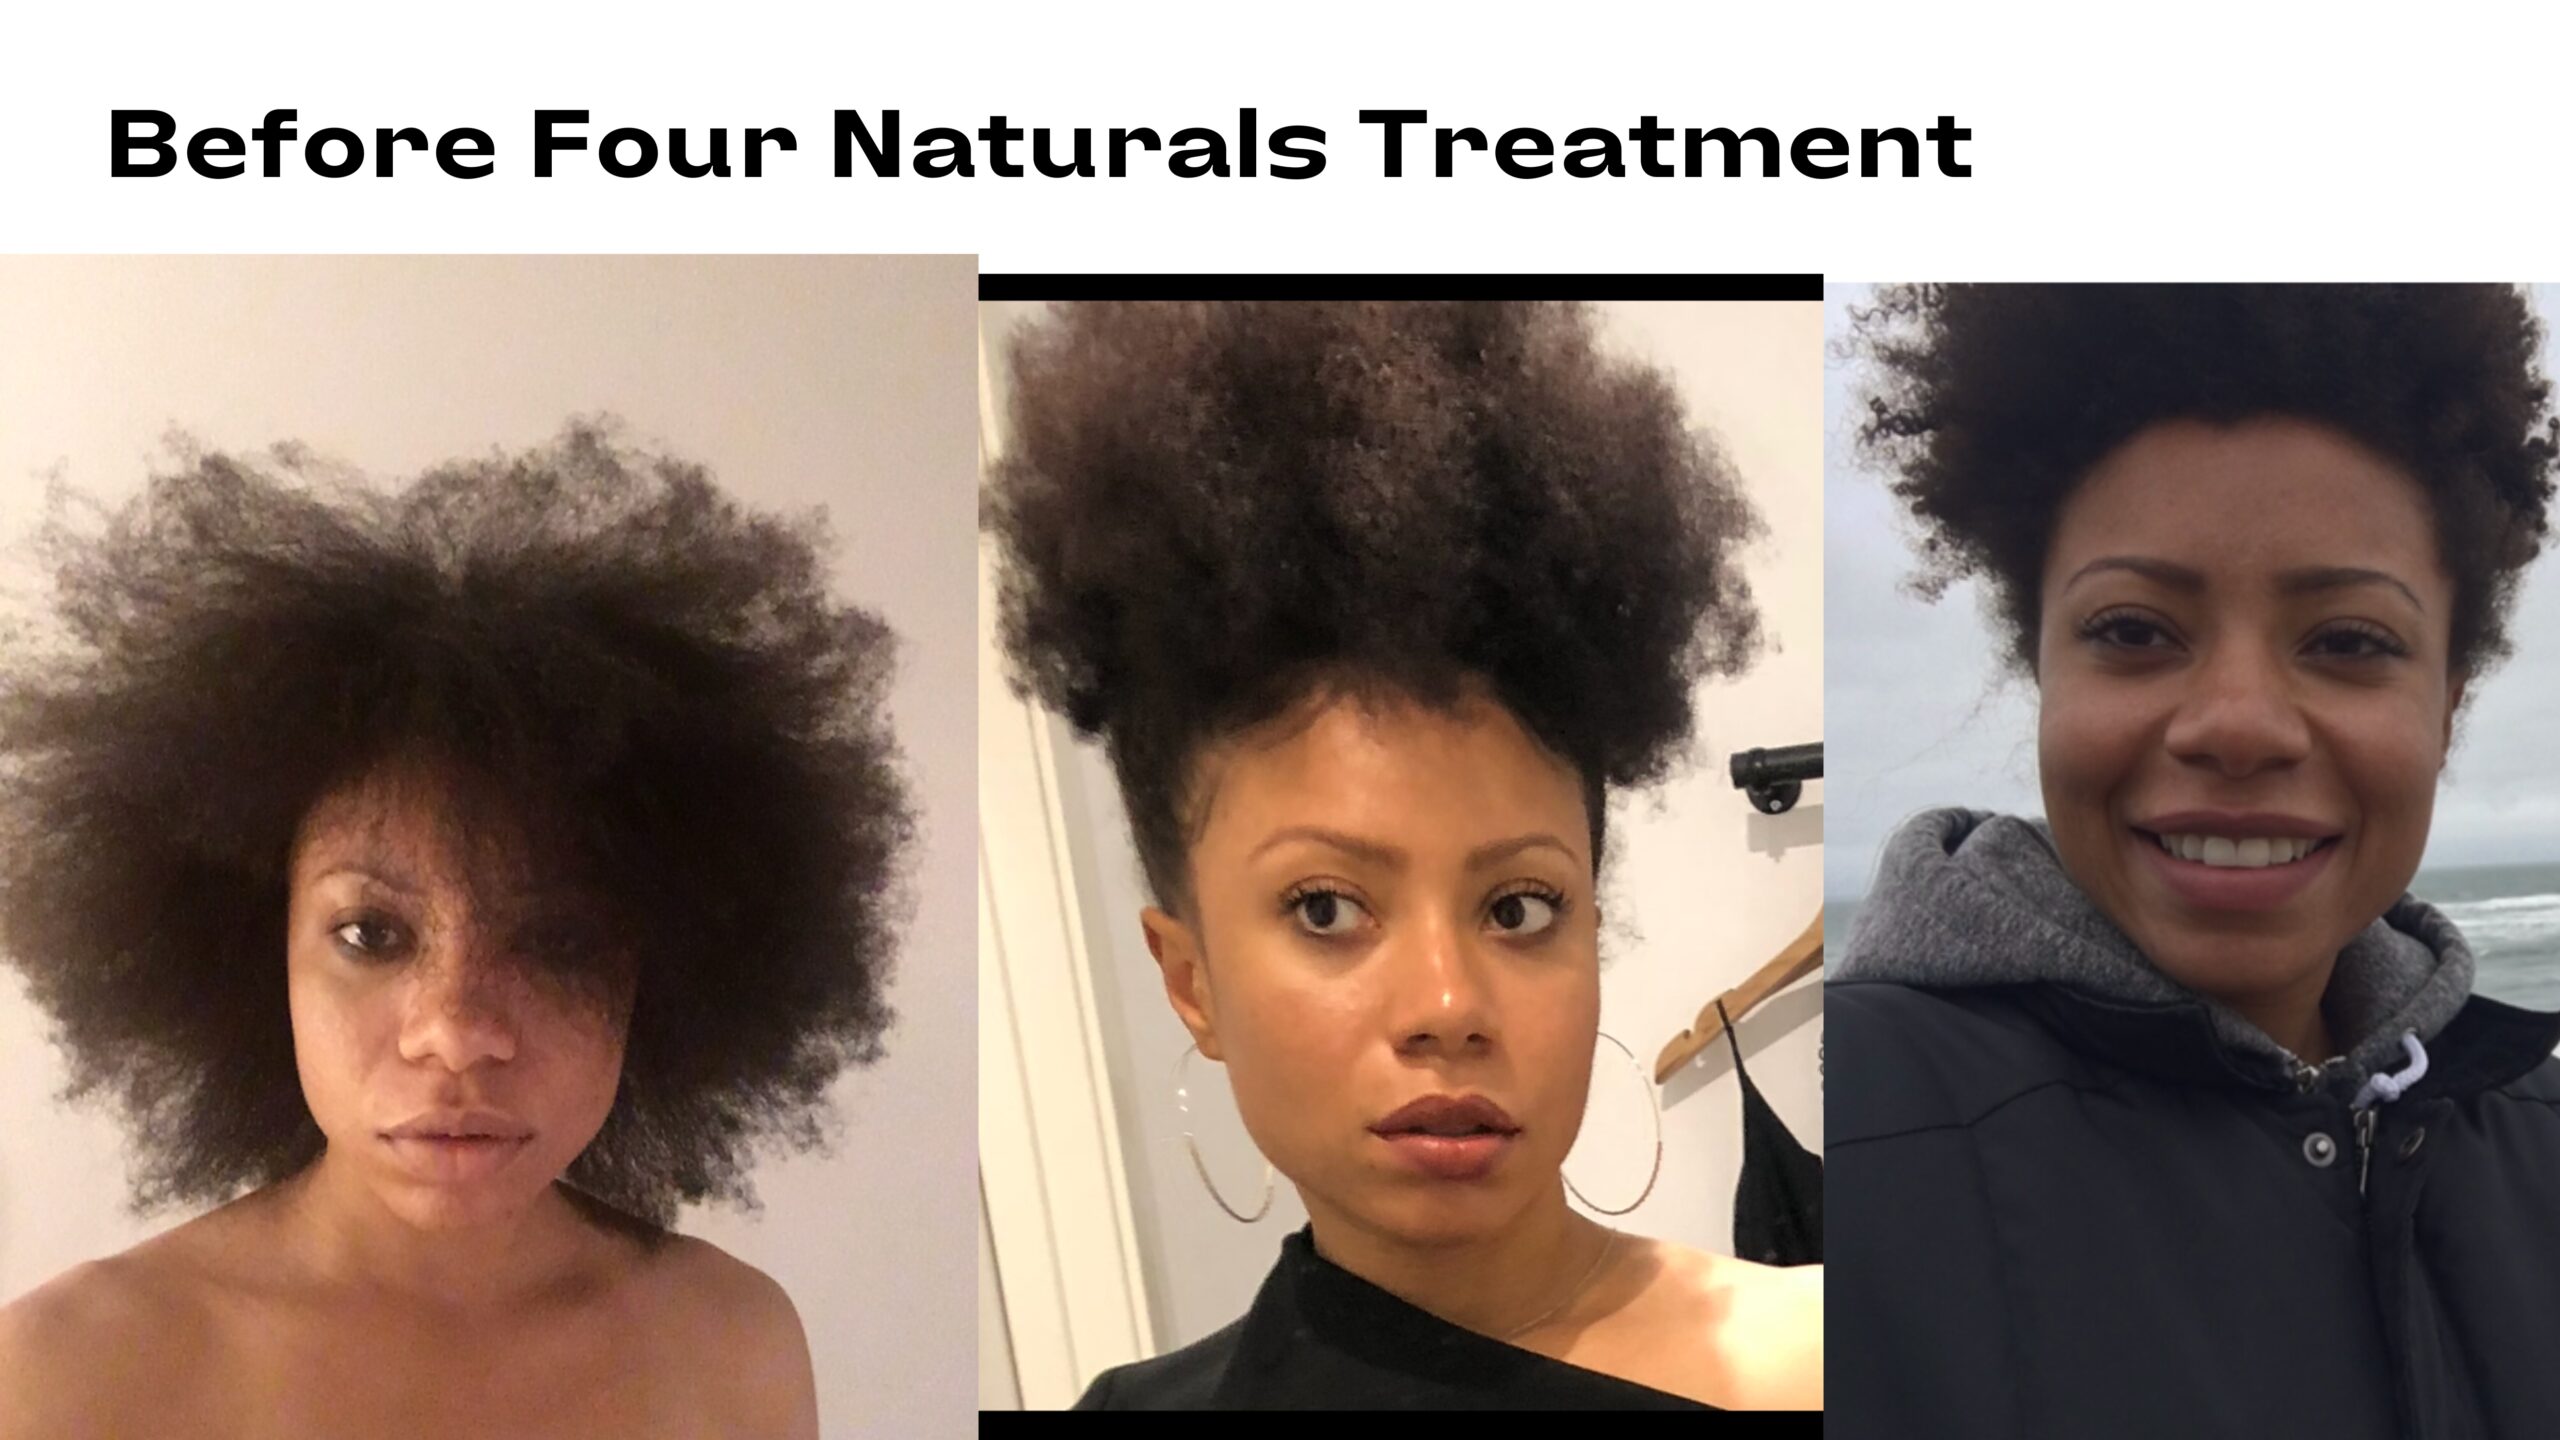 Before Four Naturals I had typical Type 4 hair problems. I struggled with: dry and breakage, I was prone to heat damage and when water touched it I had a perpetual 'fro.